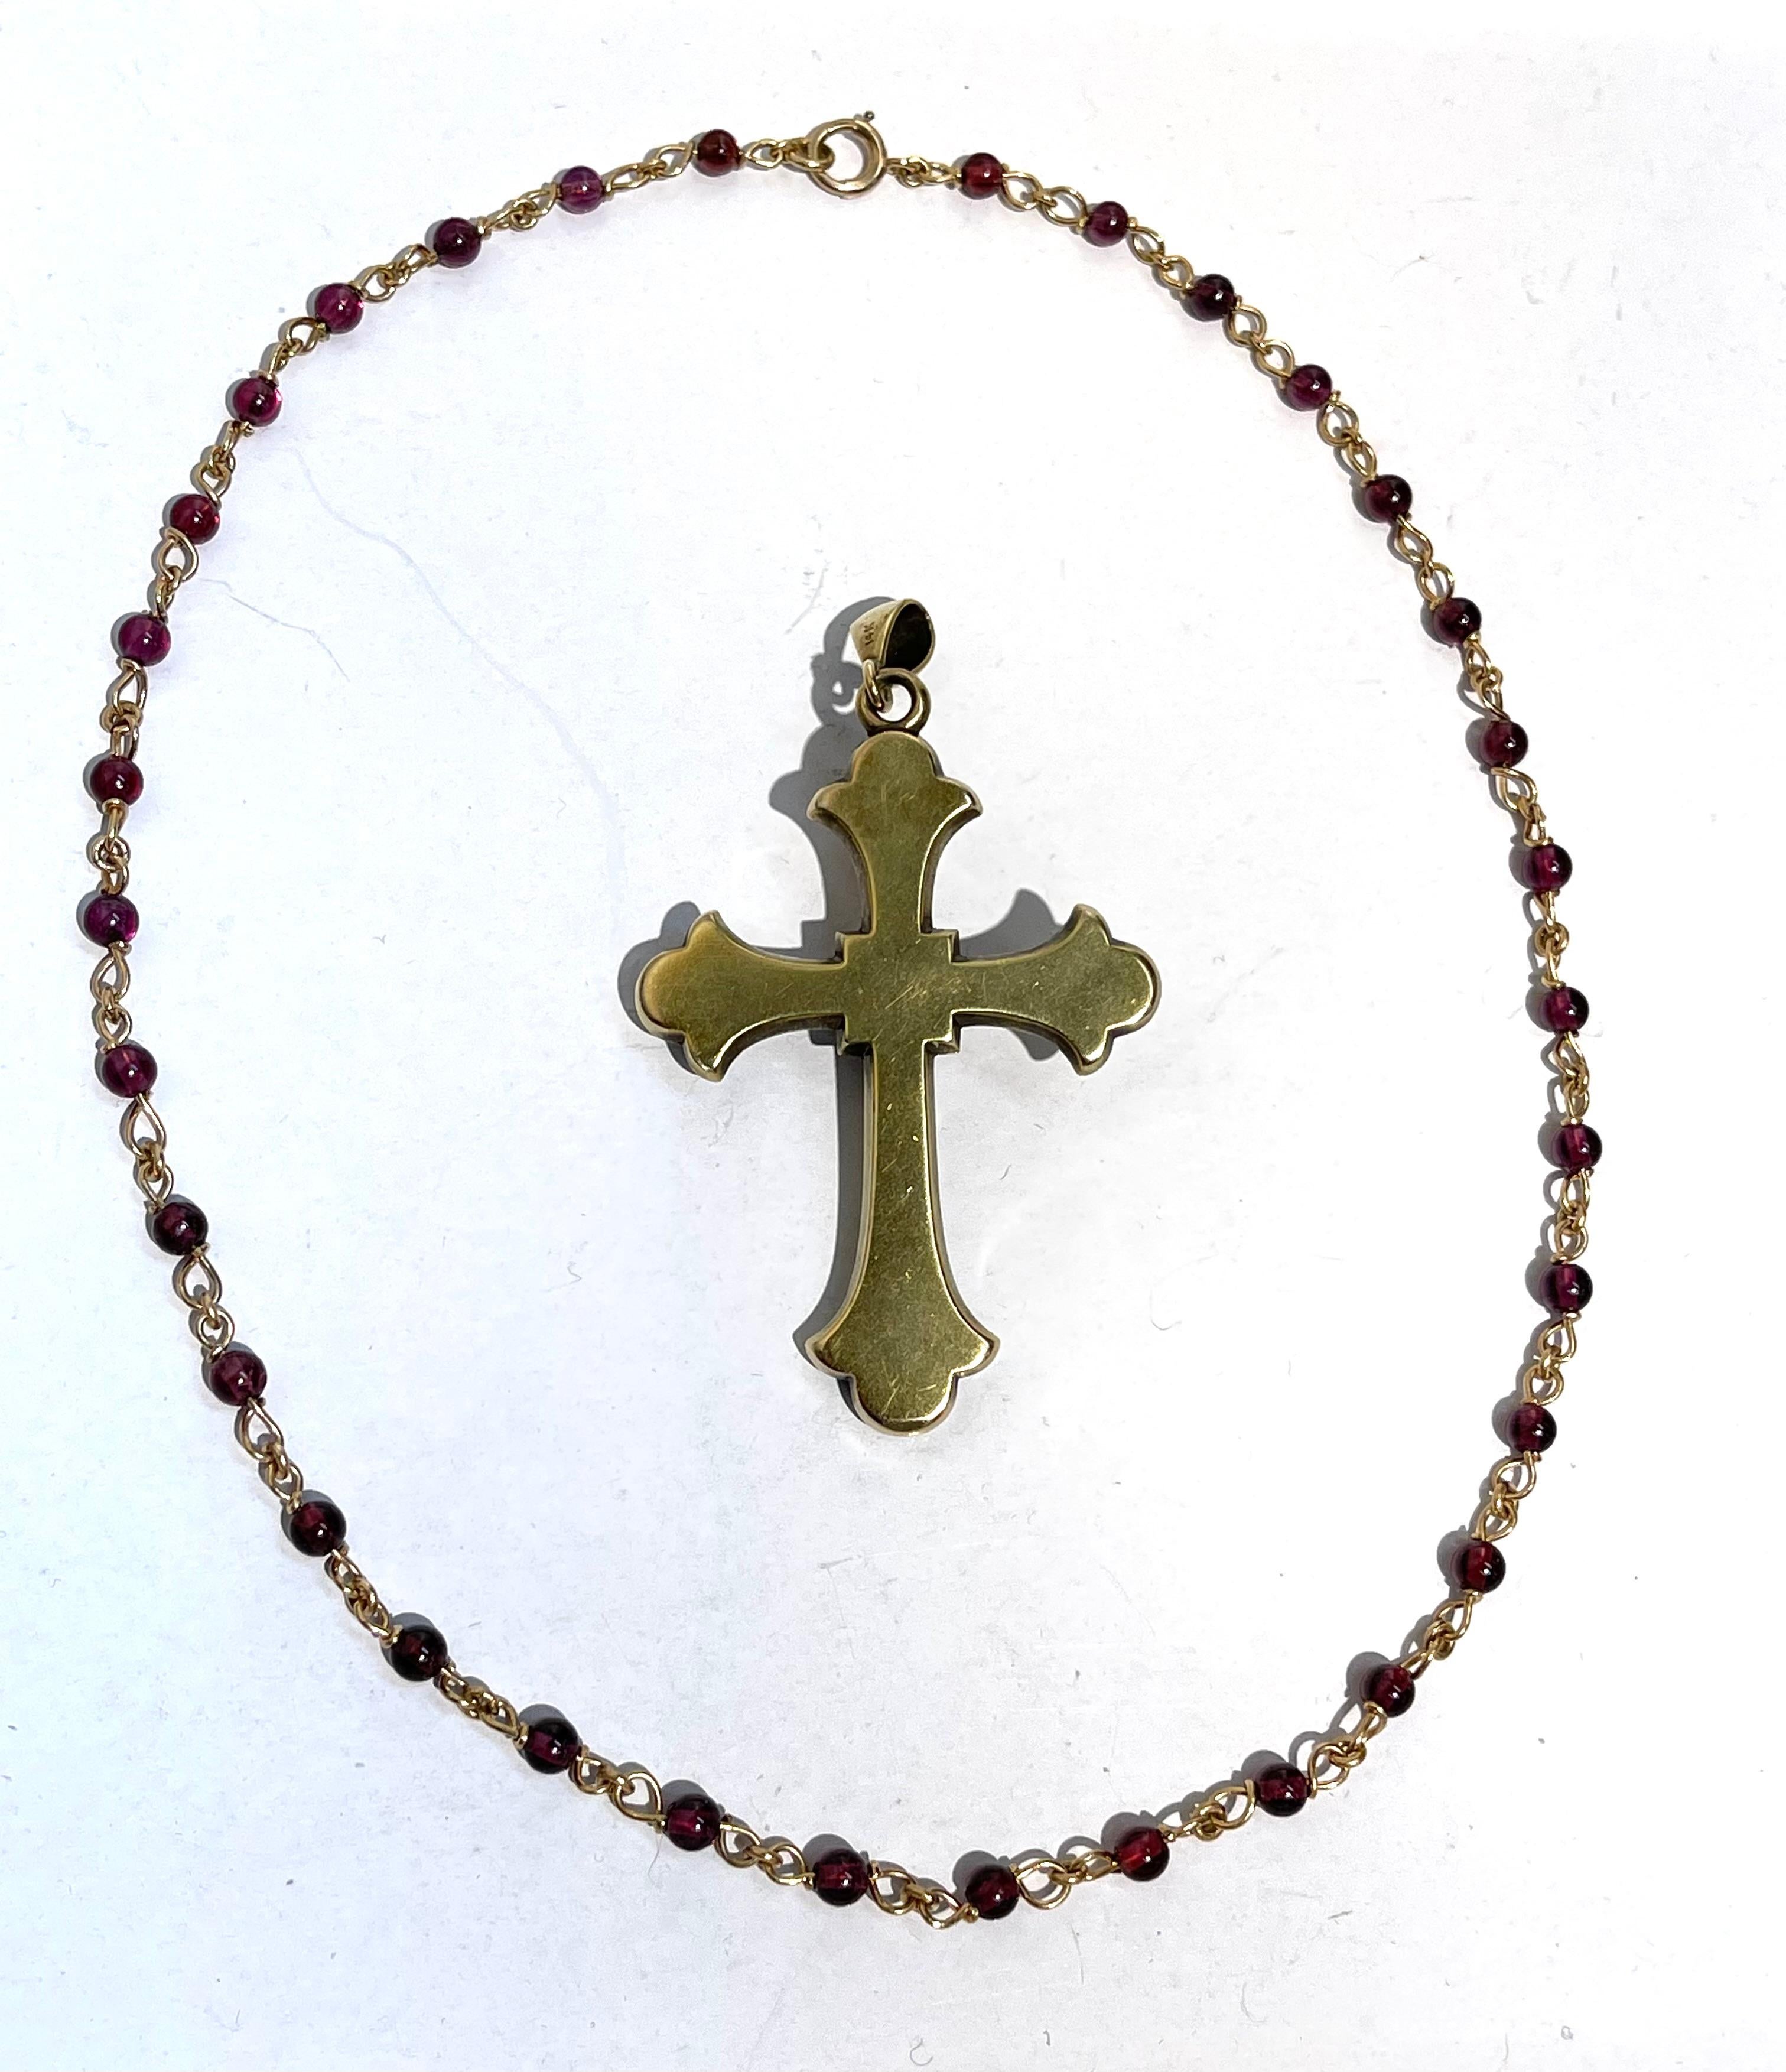 Antique Gold and Garnet Vintage Statement Cross Pendant and Necklace For Sale 5